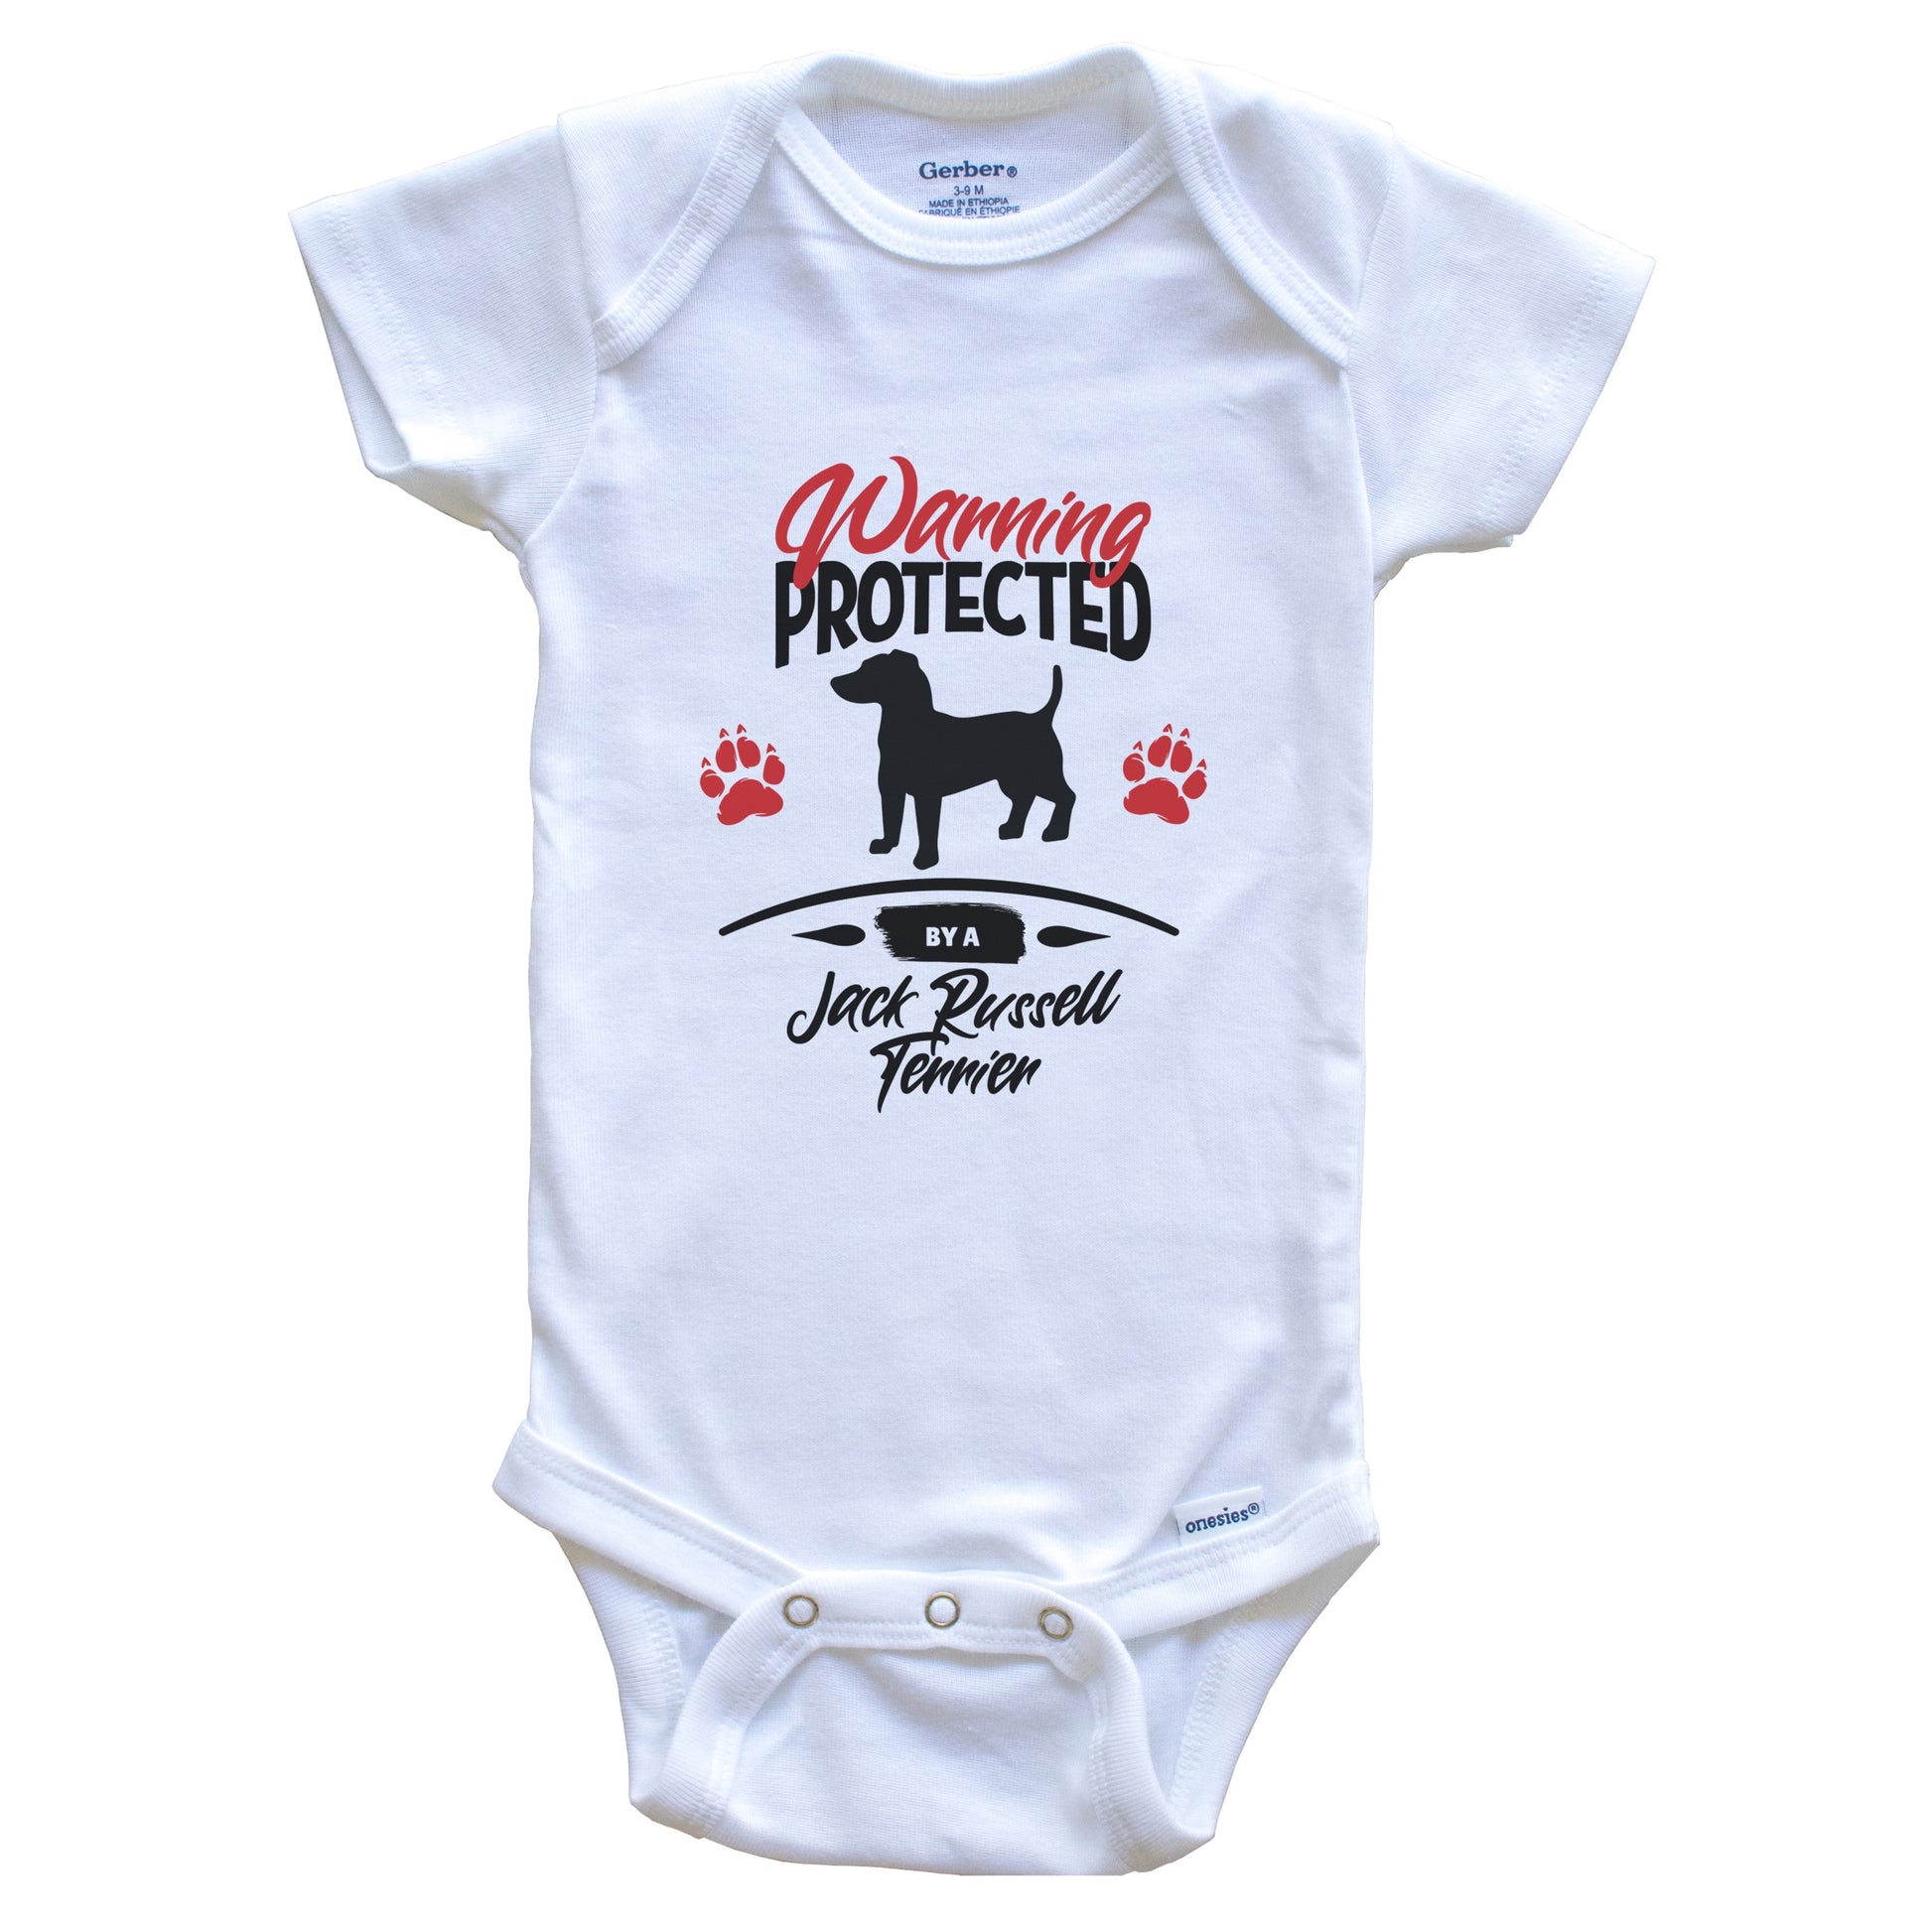 Warning Protected By A Jack Russell Terrier Funny Dog Owner Baby Bodysuit